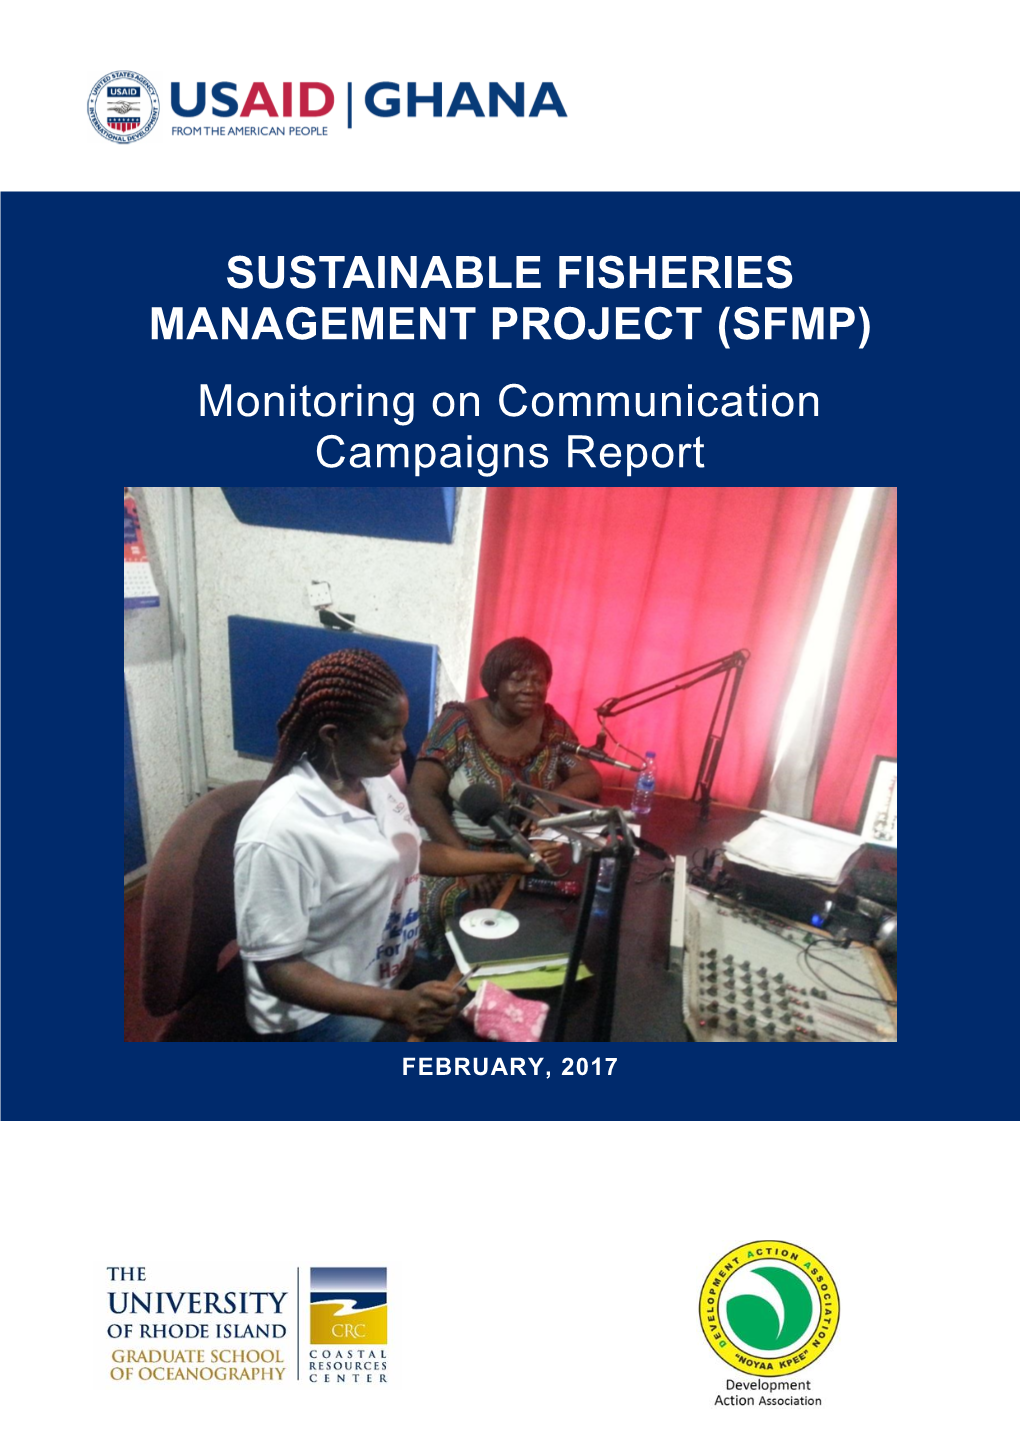 SUSTAINABLE FISHERIES MANAGEMENT PROJECT (SFMP) Monitoring on Communication Campaigns Report